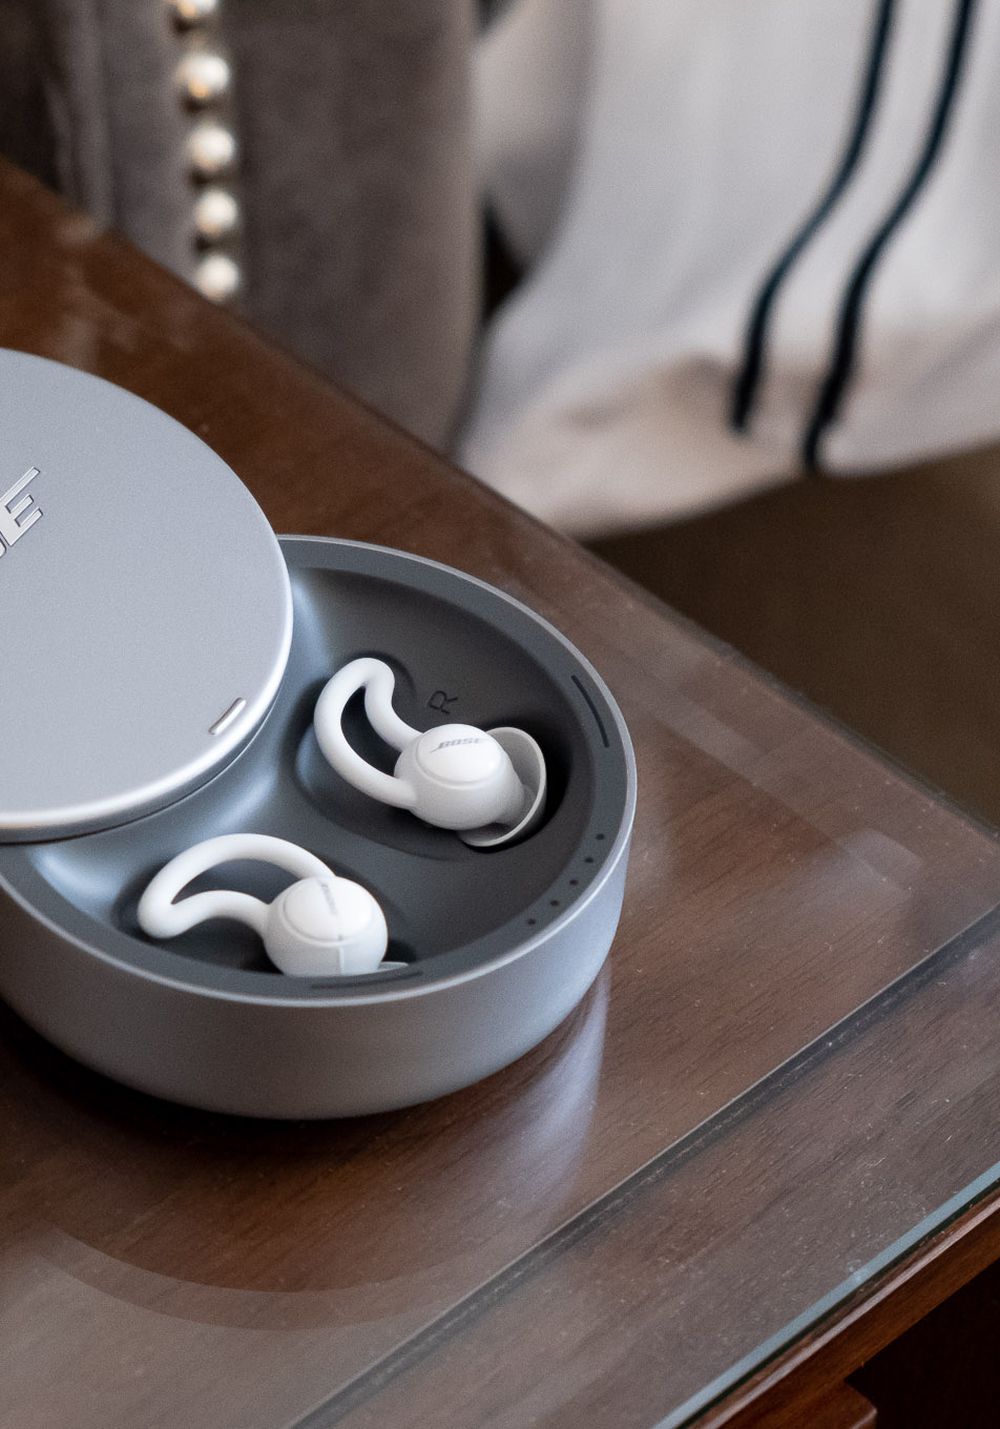 Bose discontinues Sleepbuds due to faulty battery, will offer full 